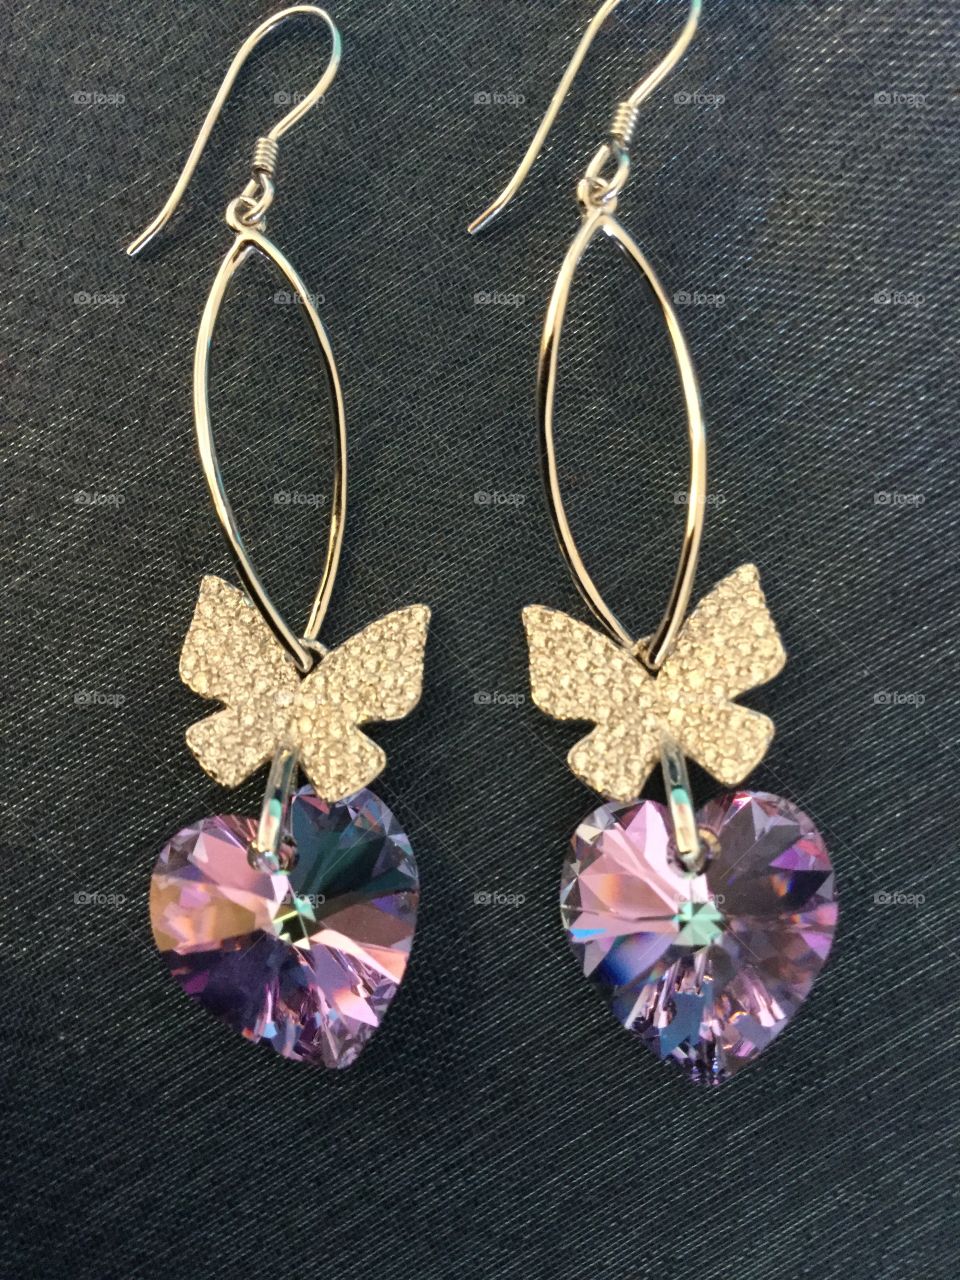 Crystal hearts and Silver butterfly earrings 